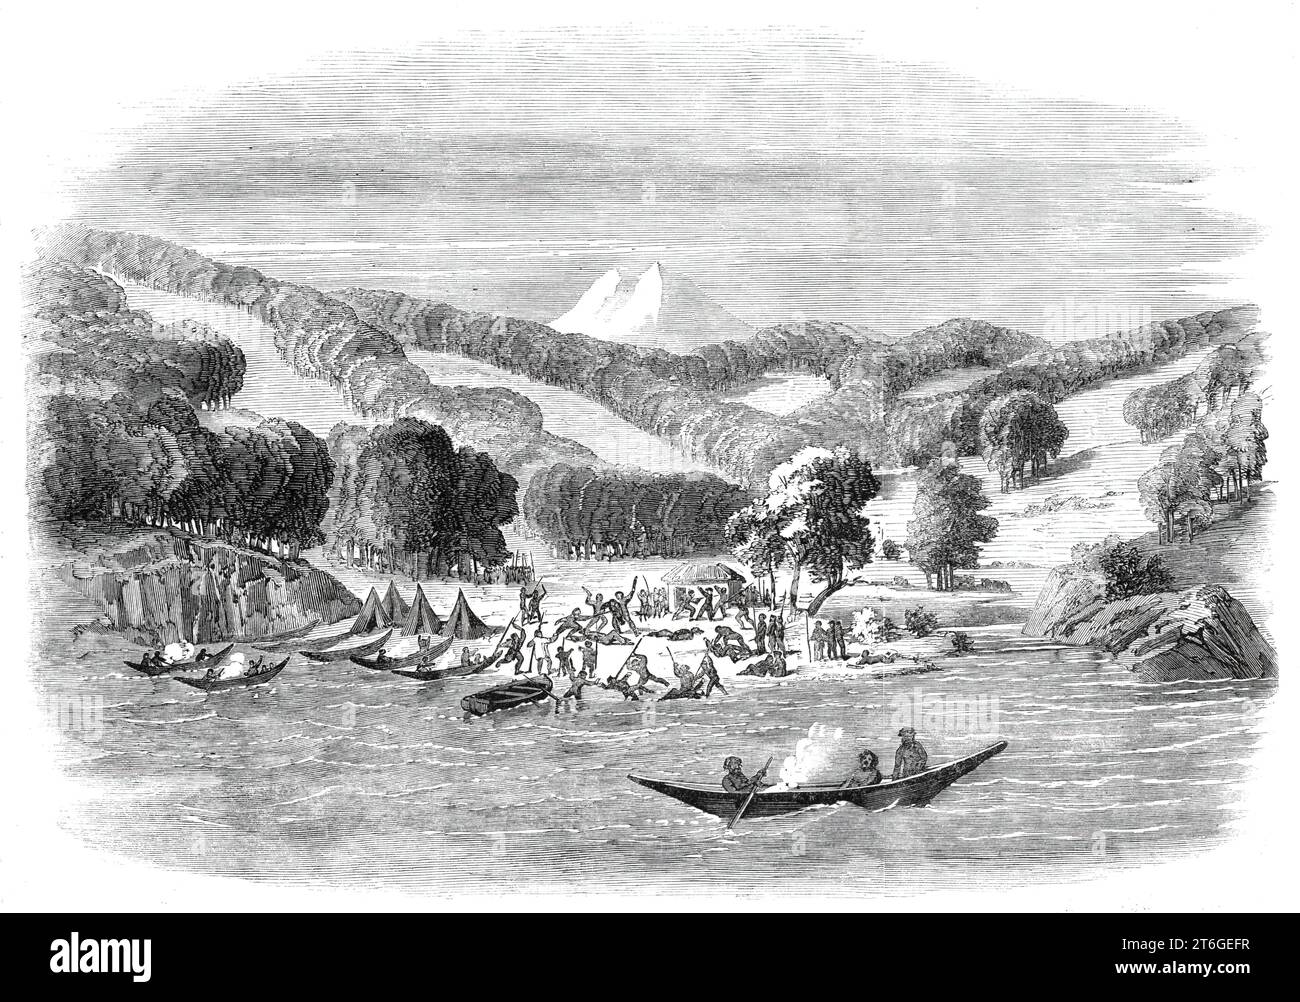 Massacre of a mission party of the &quot;Alan Gardiner&quot; by the natives at Woolya, Tierra del Fuego, 1860. Engraving after a sketch by Mr. Havers. In October 1859, the schooner Alan Gardiner, belonging to the Patagonian Missionary Society, returned some Fuegians to their native country, intending to '...bring back a further supply to be Christianised at the station upon Keppel Island (West Falkland)...the Alan Gardiner...landed some of the natives, who were searched before going over the ship's side, a proceeding that had on a former occasion given grave offence at Keppel, where the injure Stock Photo